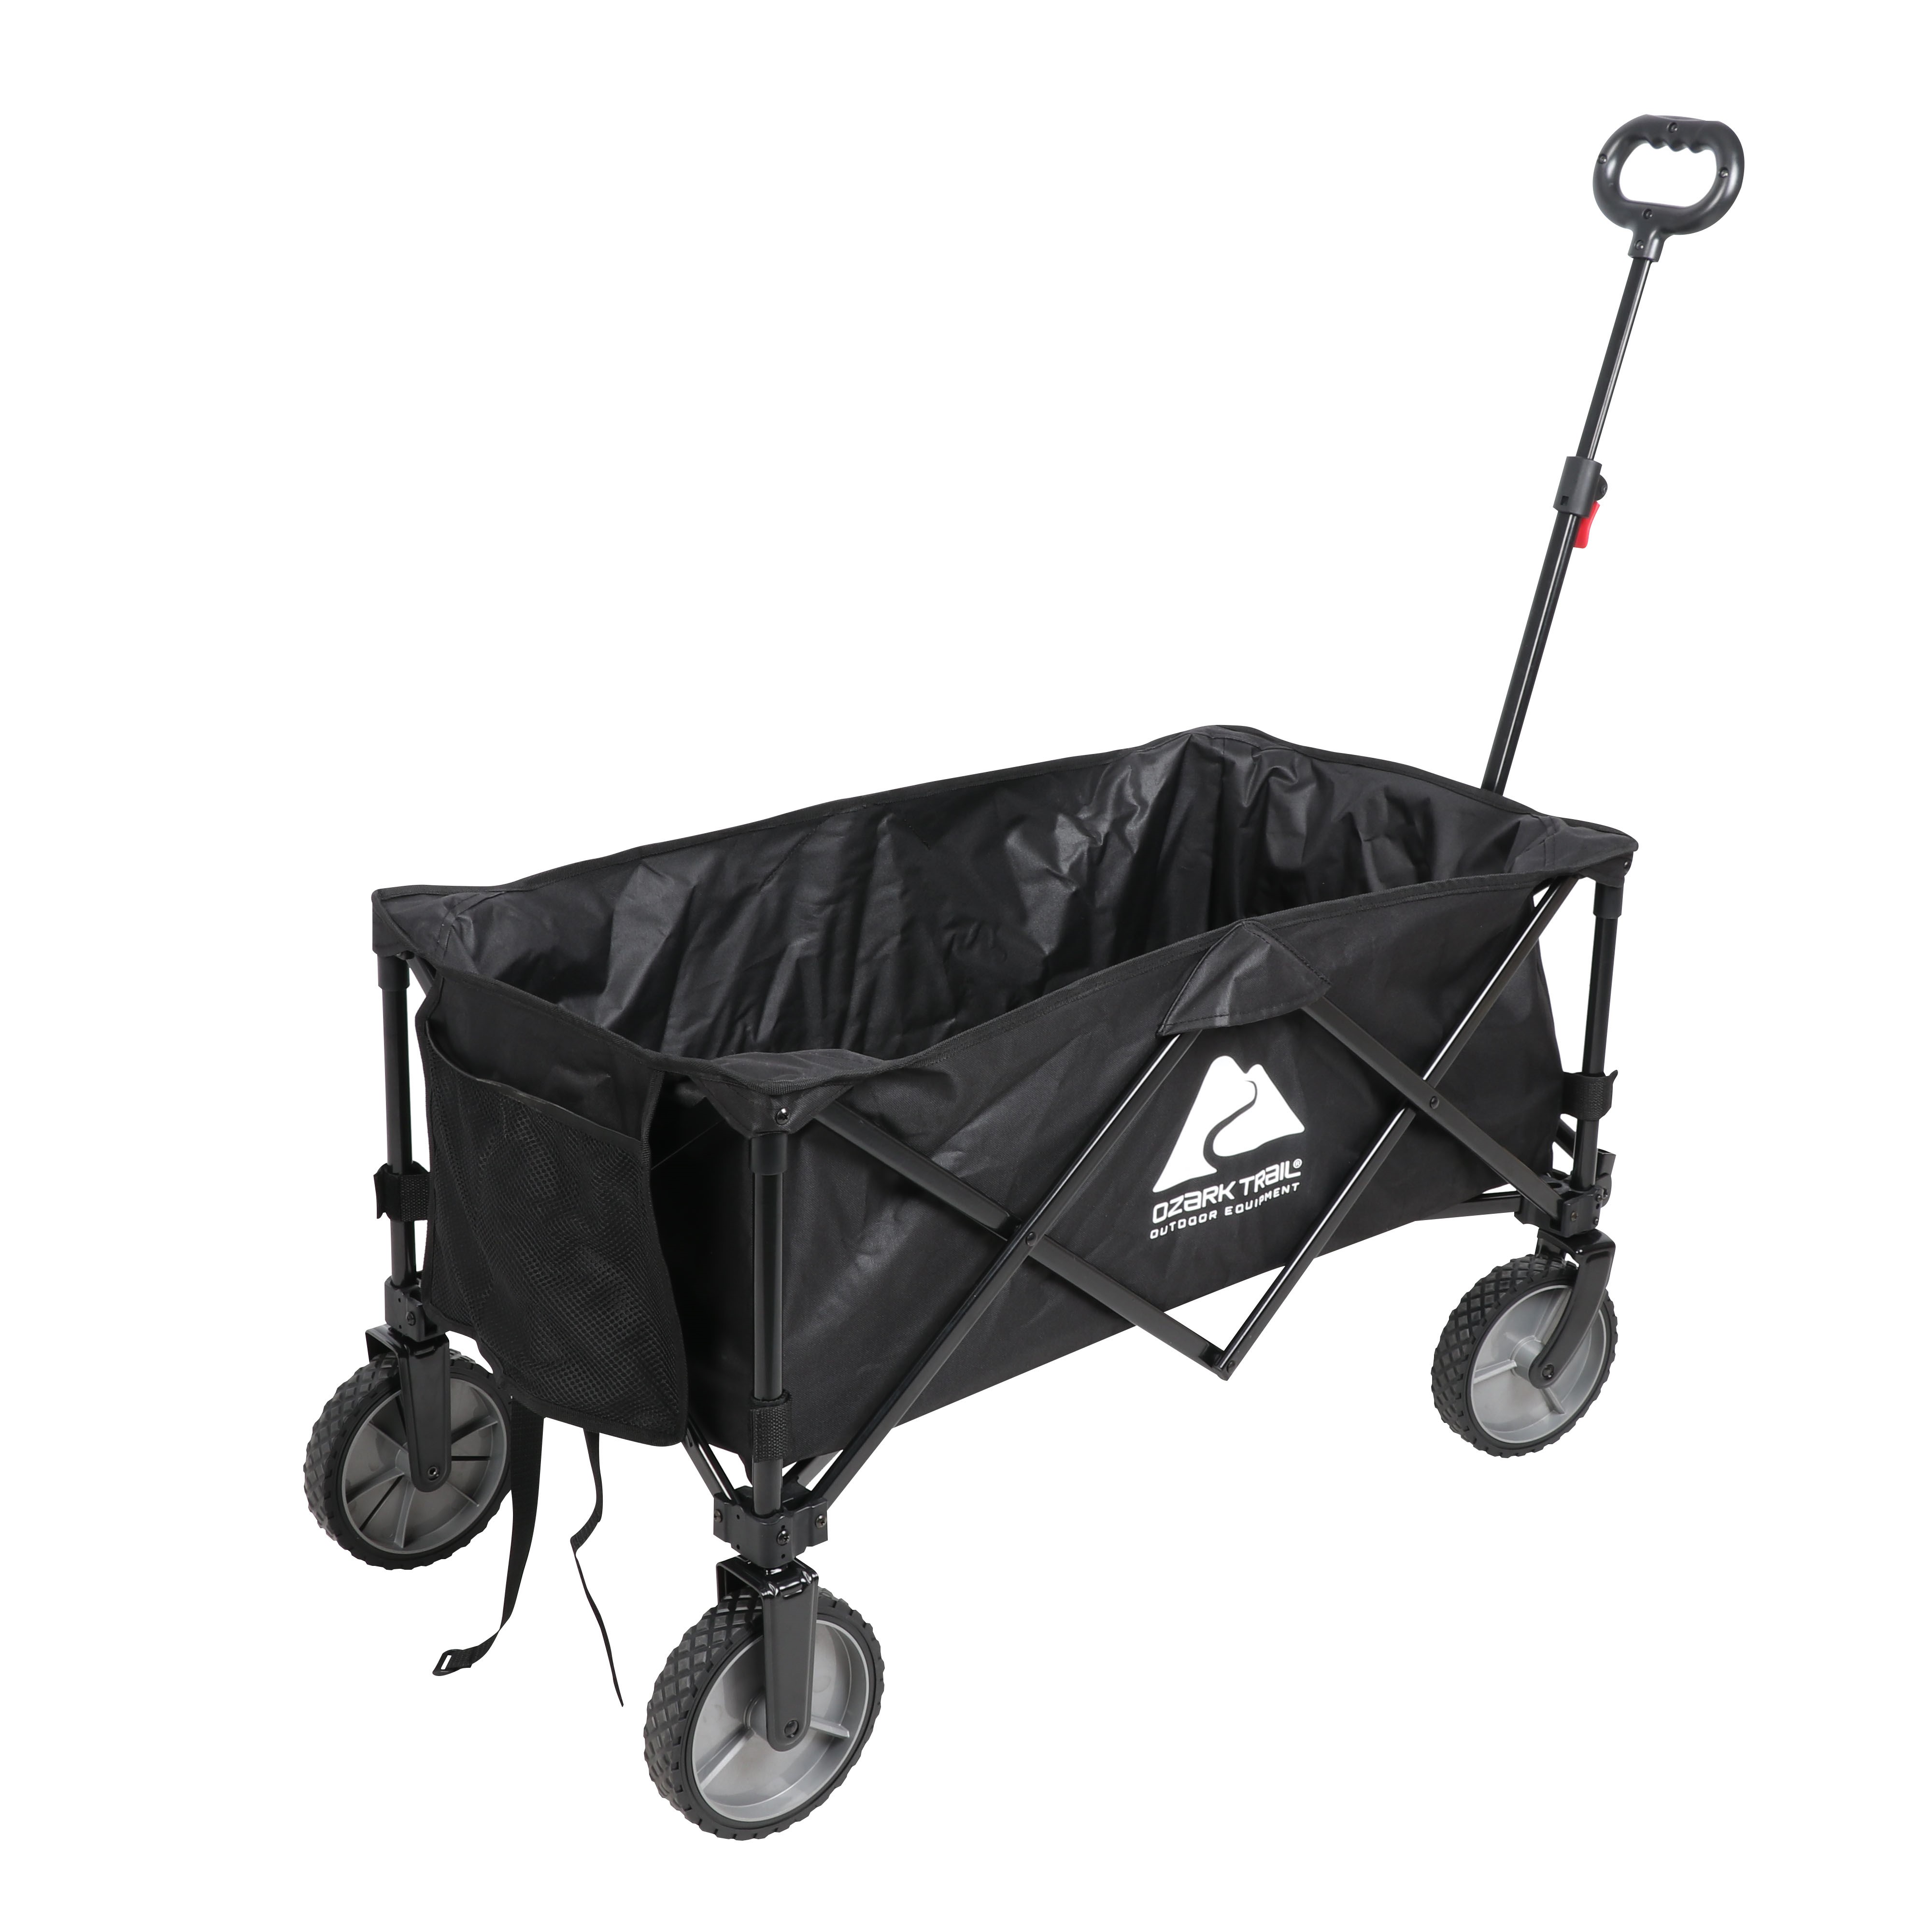 father's day gift ideas; wagon 